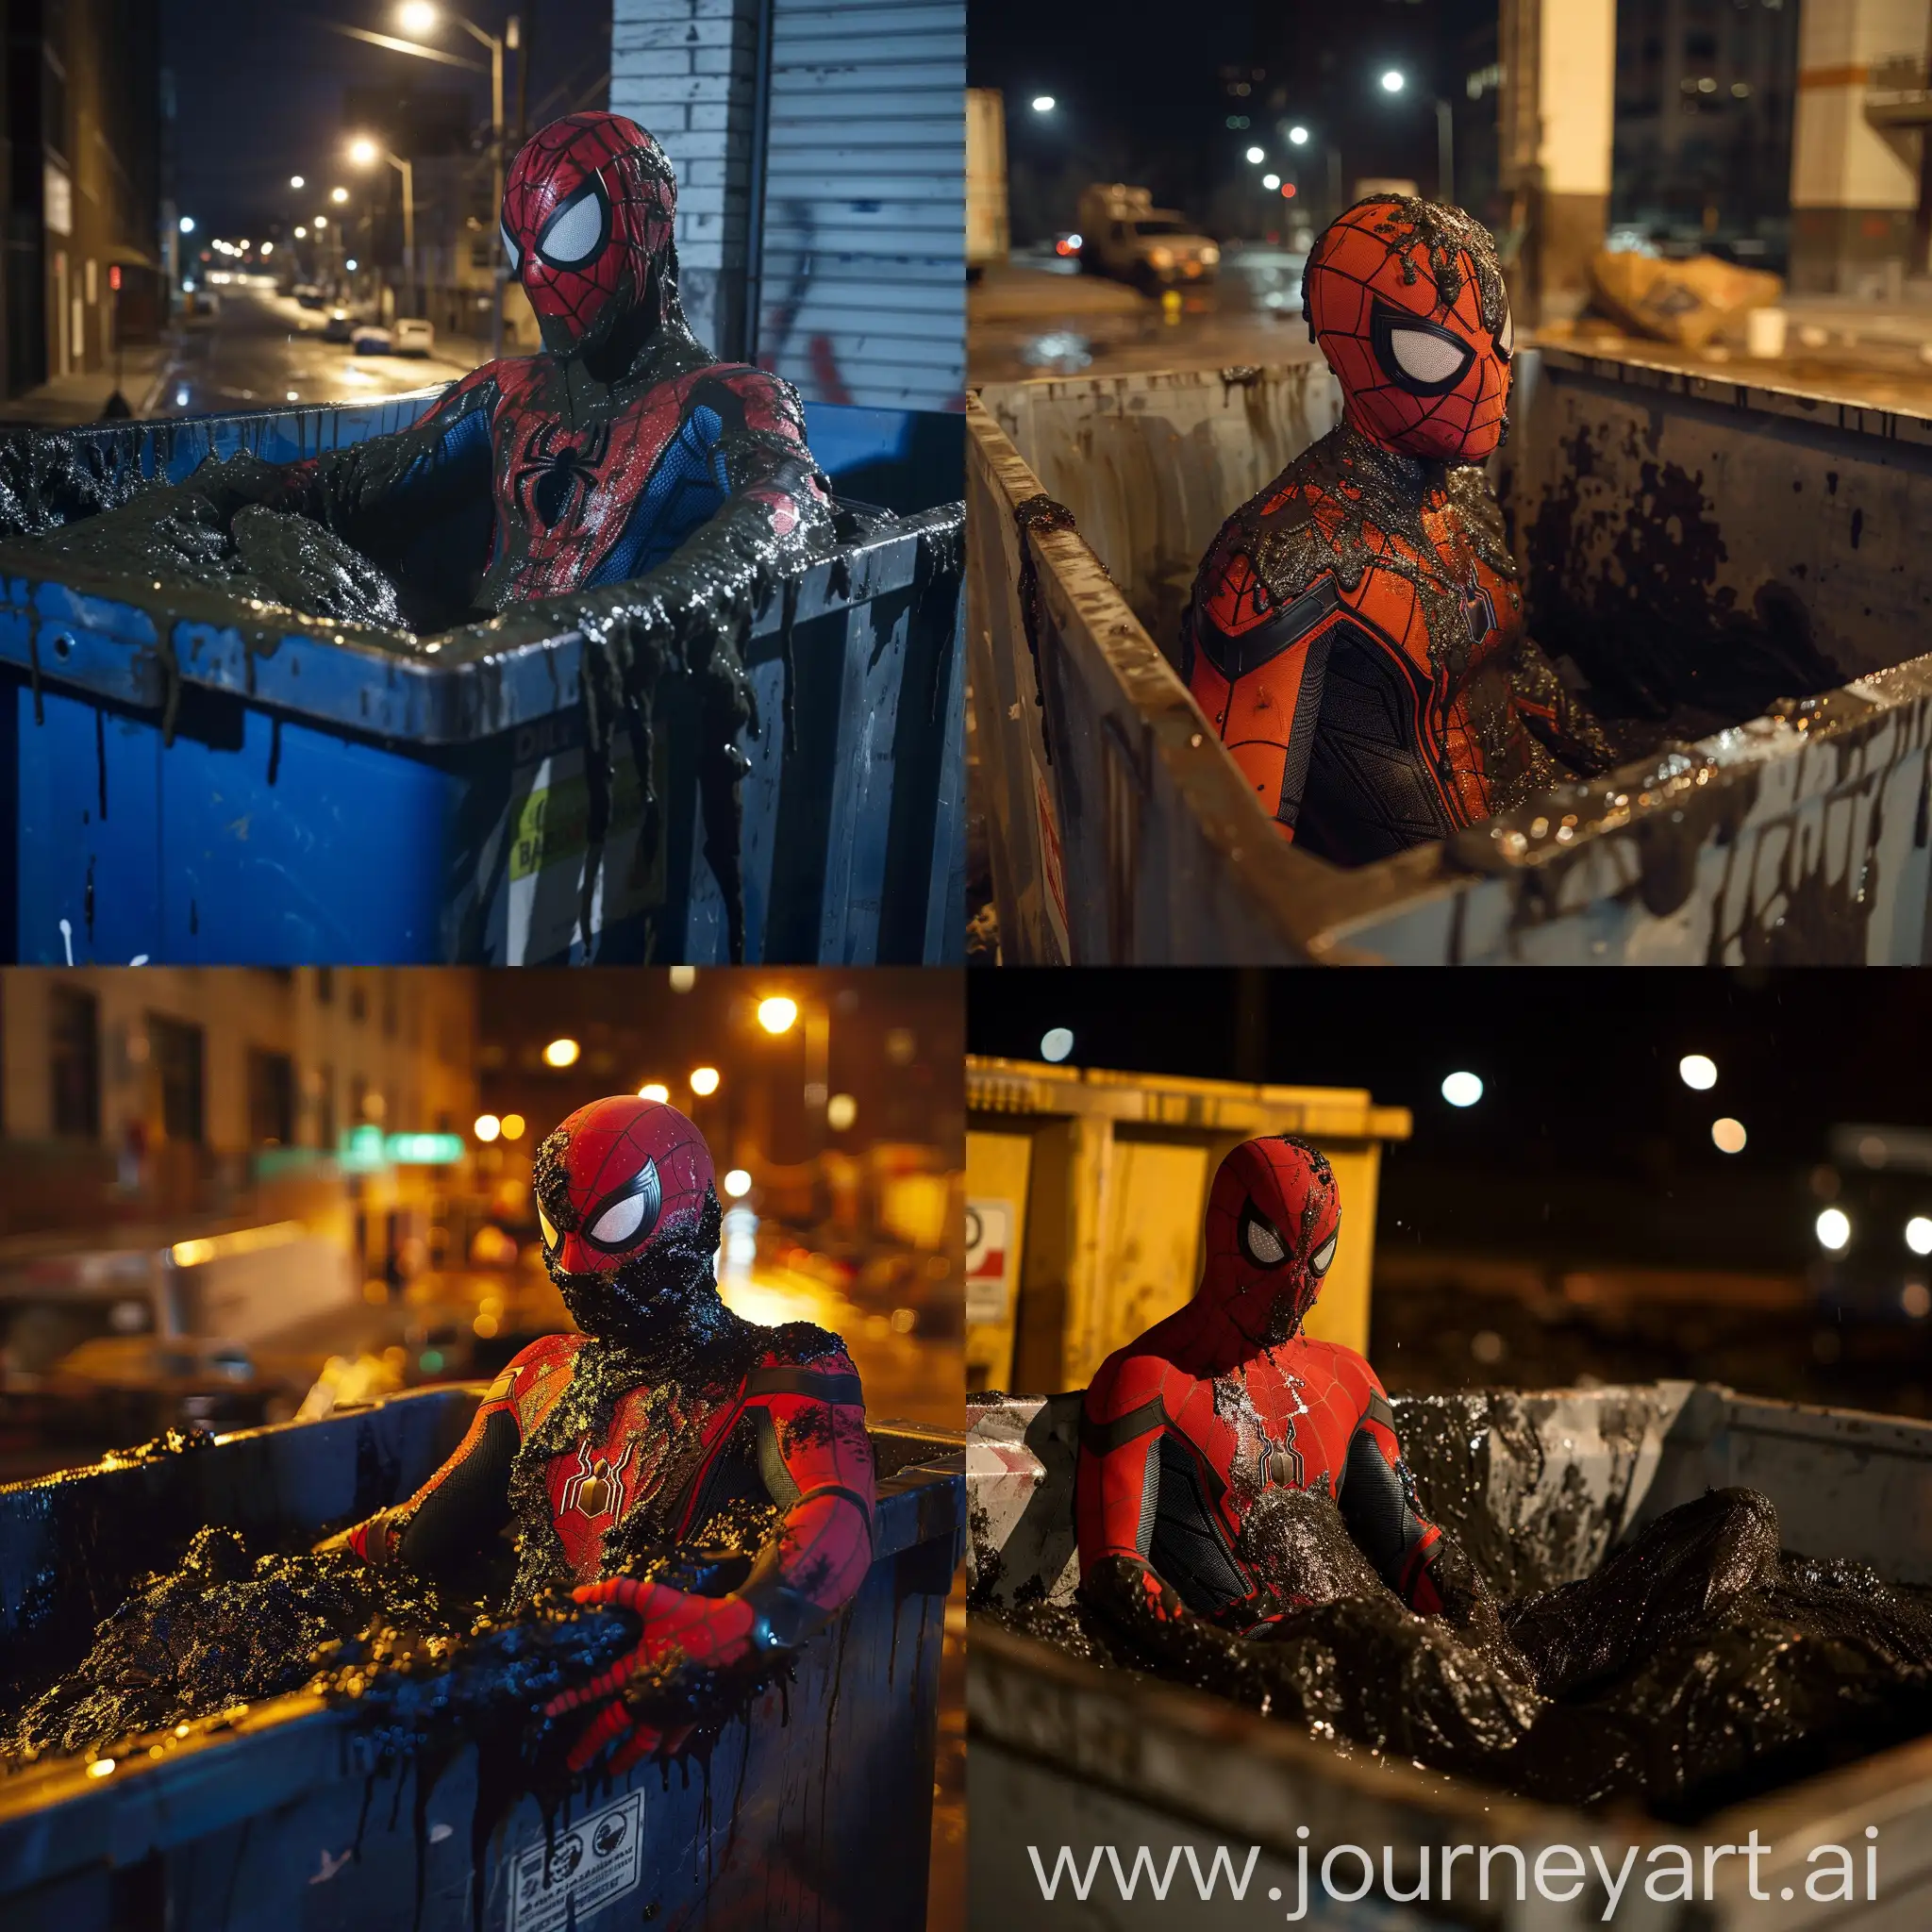 Spiderman-Covered-in-Tar-Passed-Out-in-a-Dumpster-at-Night